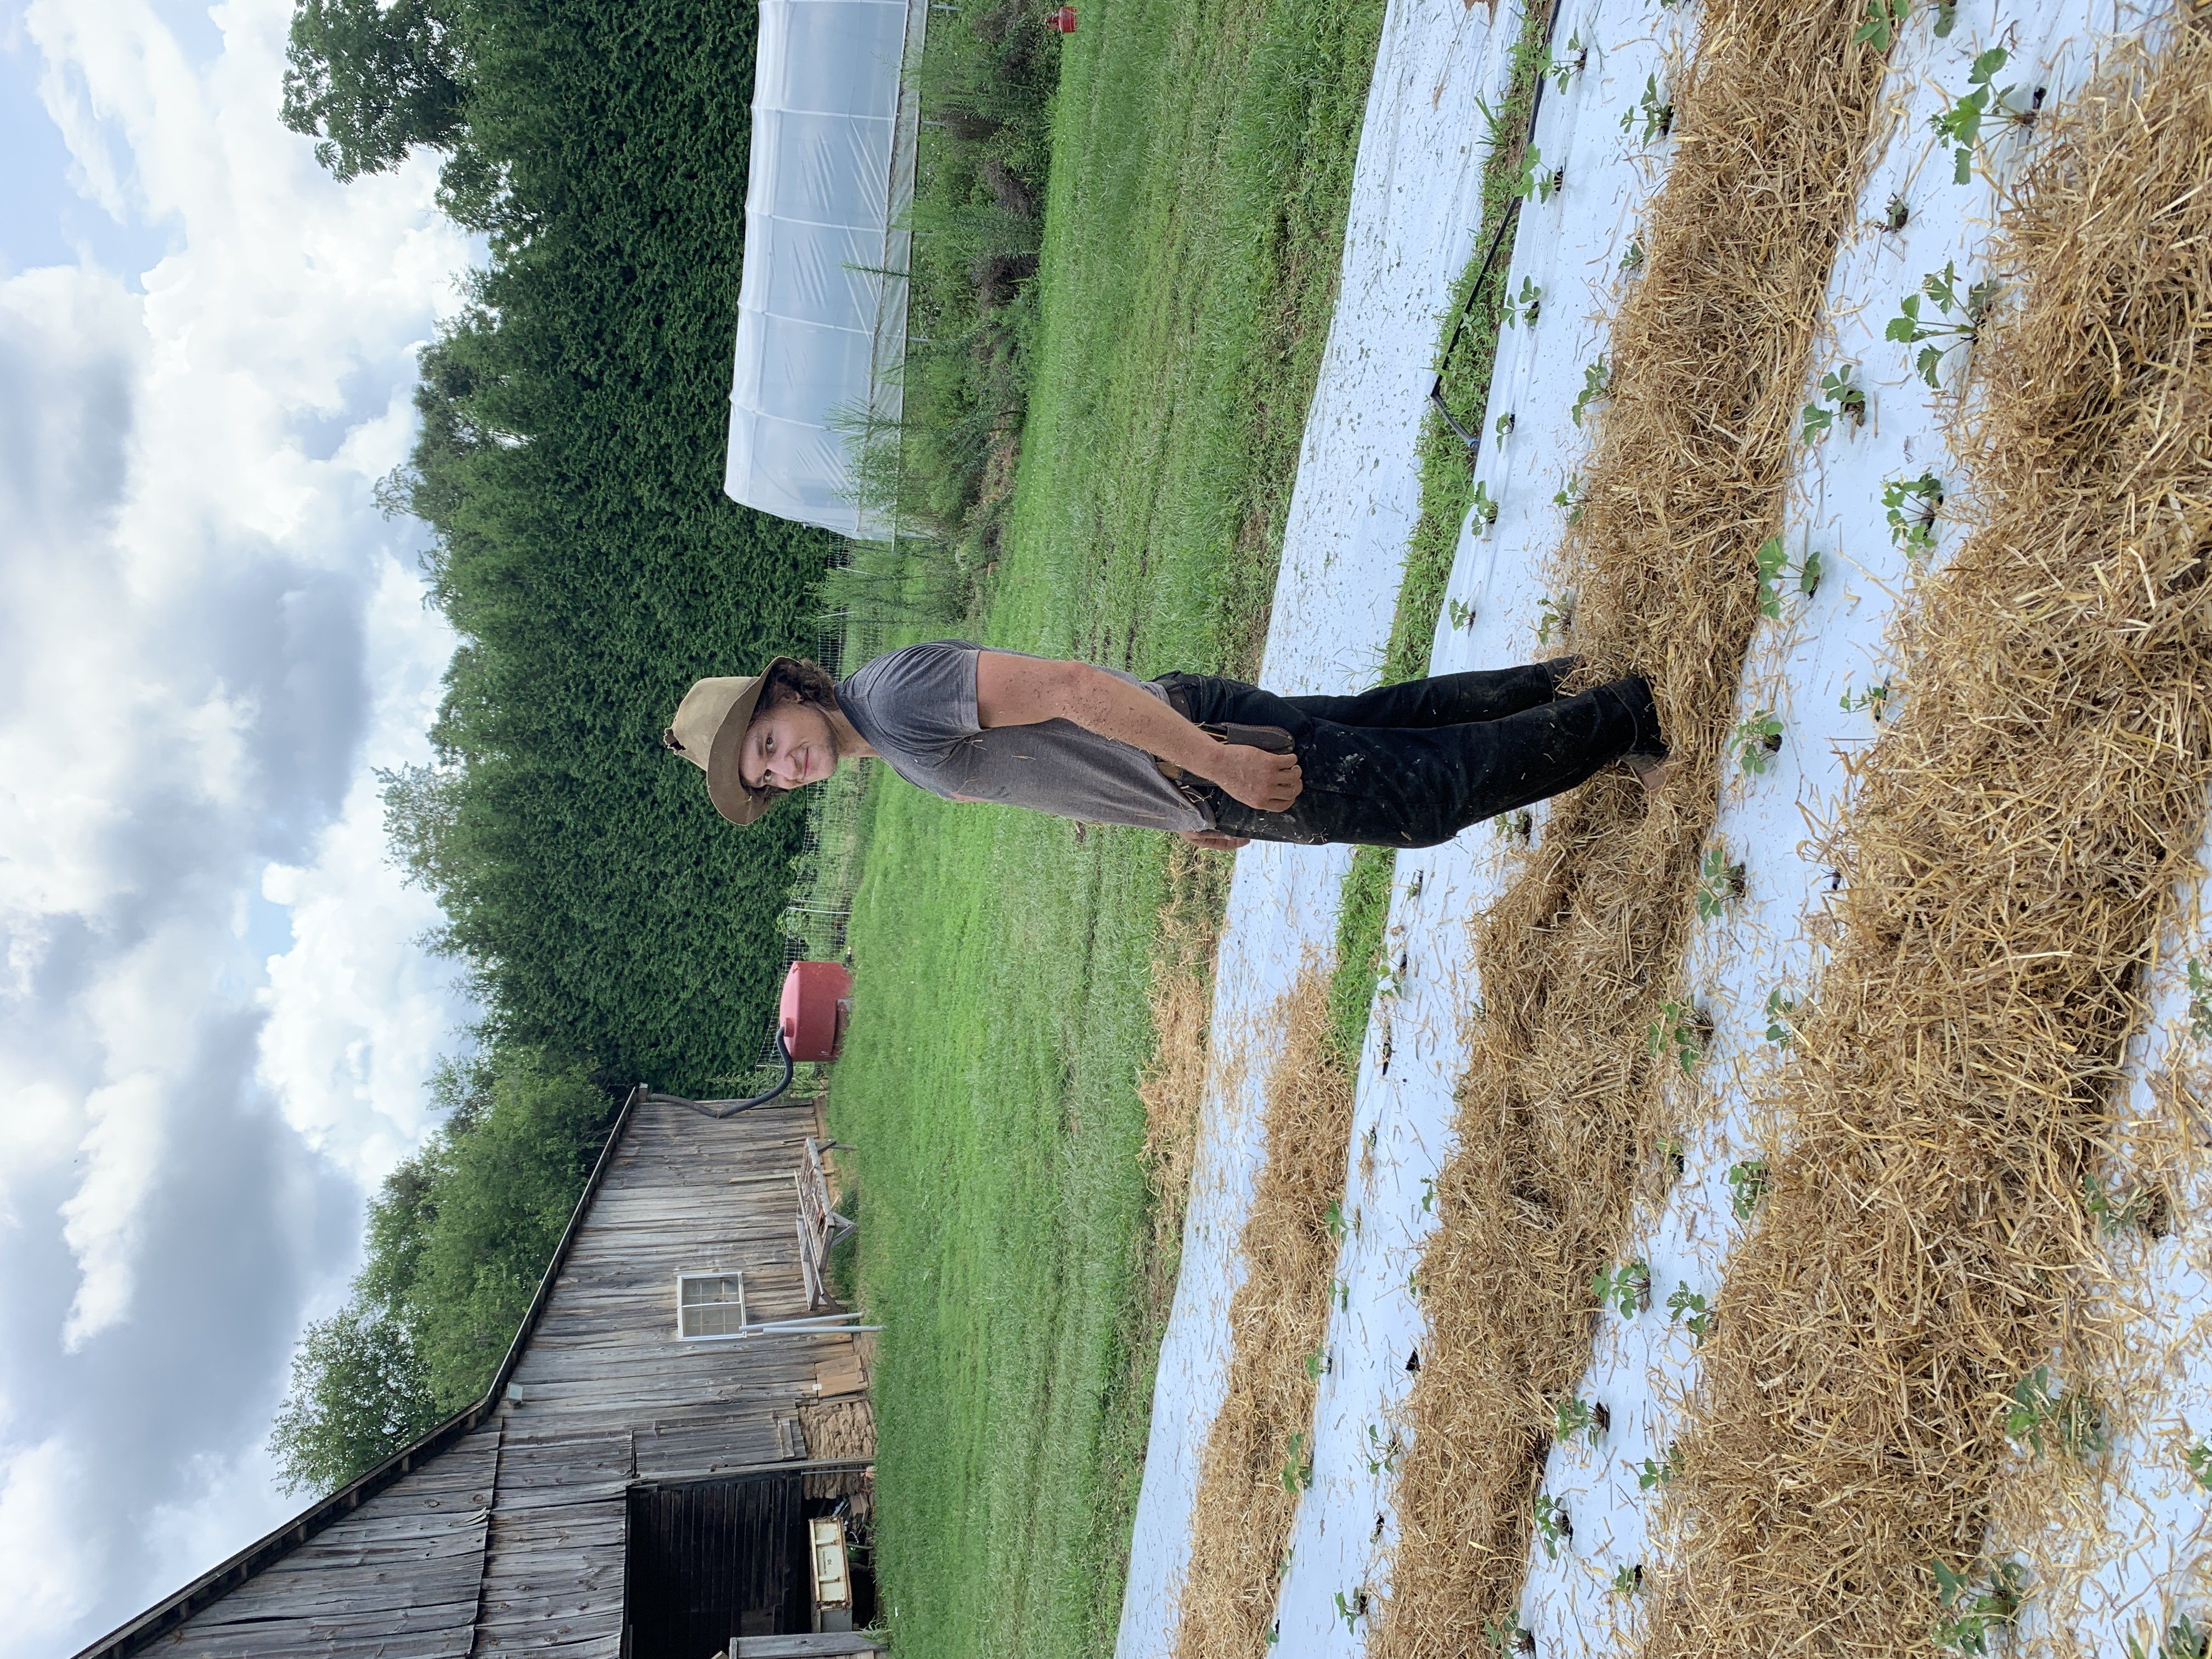 Next Happening: Farm Happenings for August 11, 2020